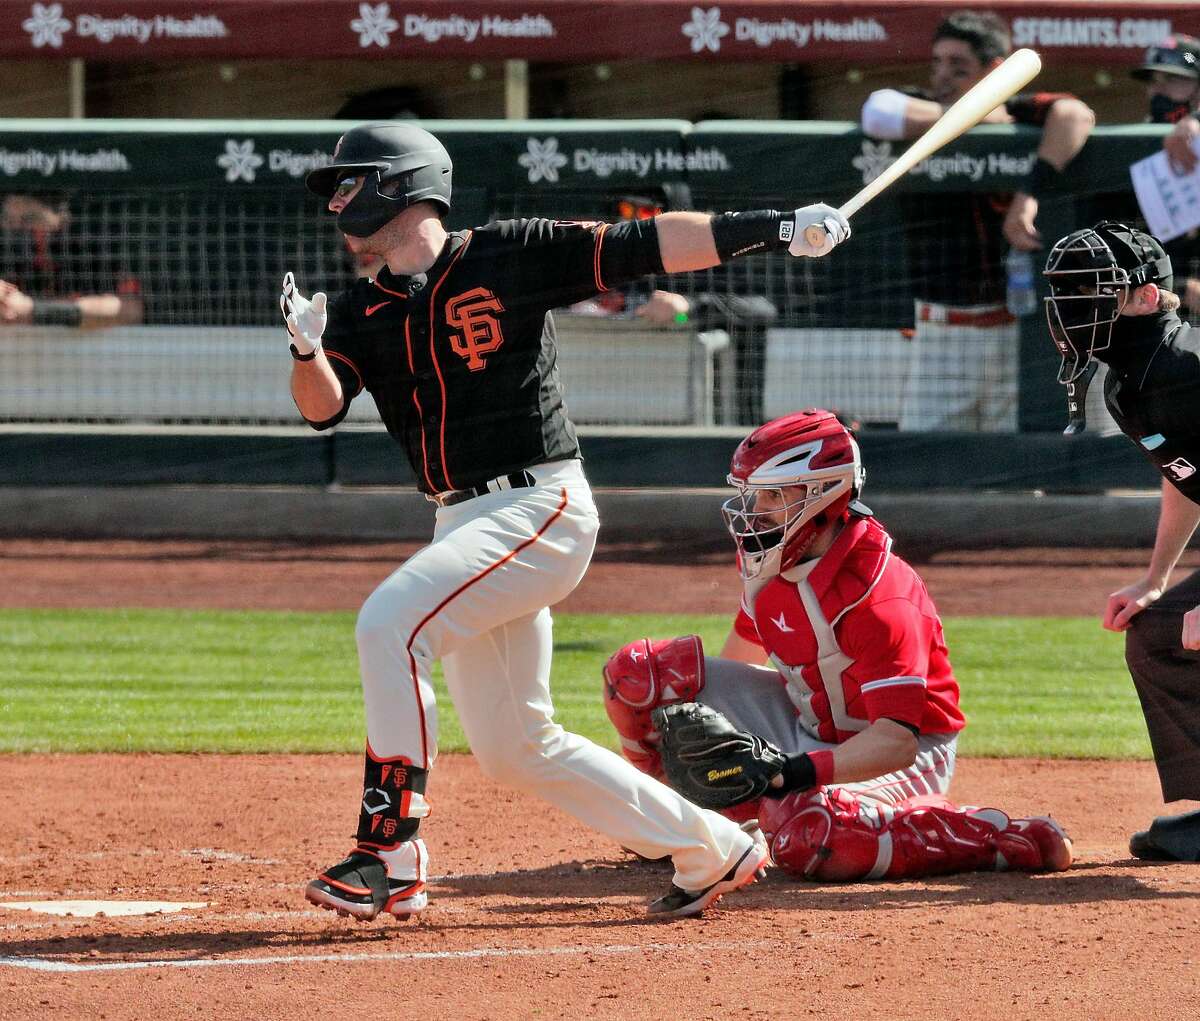 Buster Posey, who sat out last season, returned to the lineup and got the Giants’ first hit of the spring with a single to right.